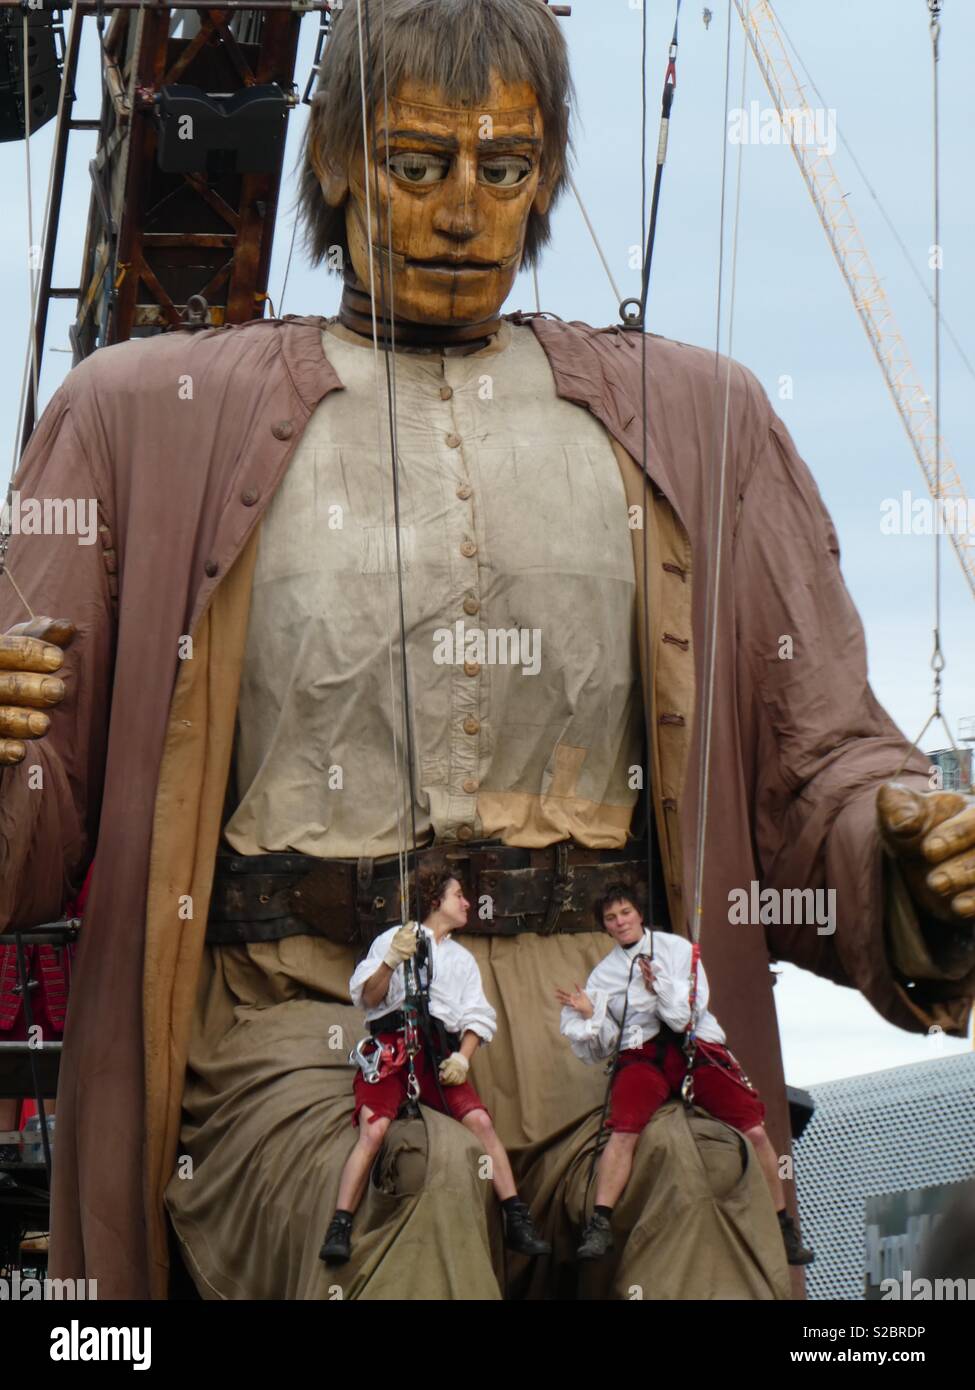 Giant spectacular royal de Luxe Liverpool uncle Giant & his puppeteers Stock Photo